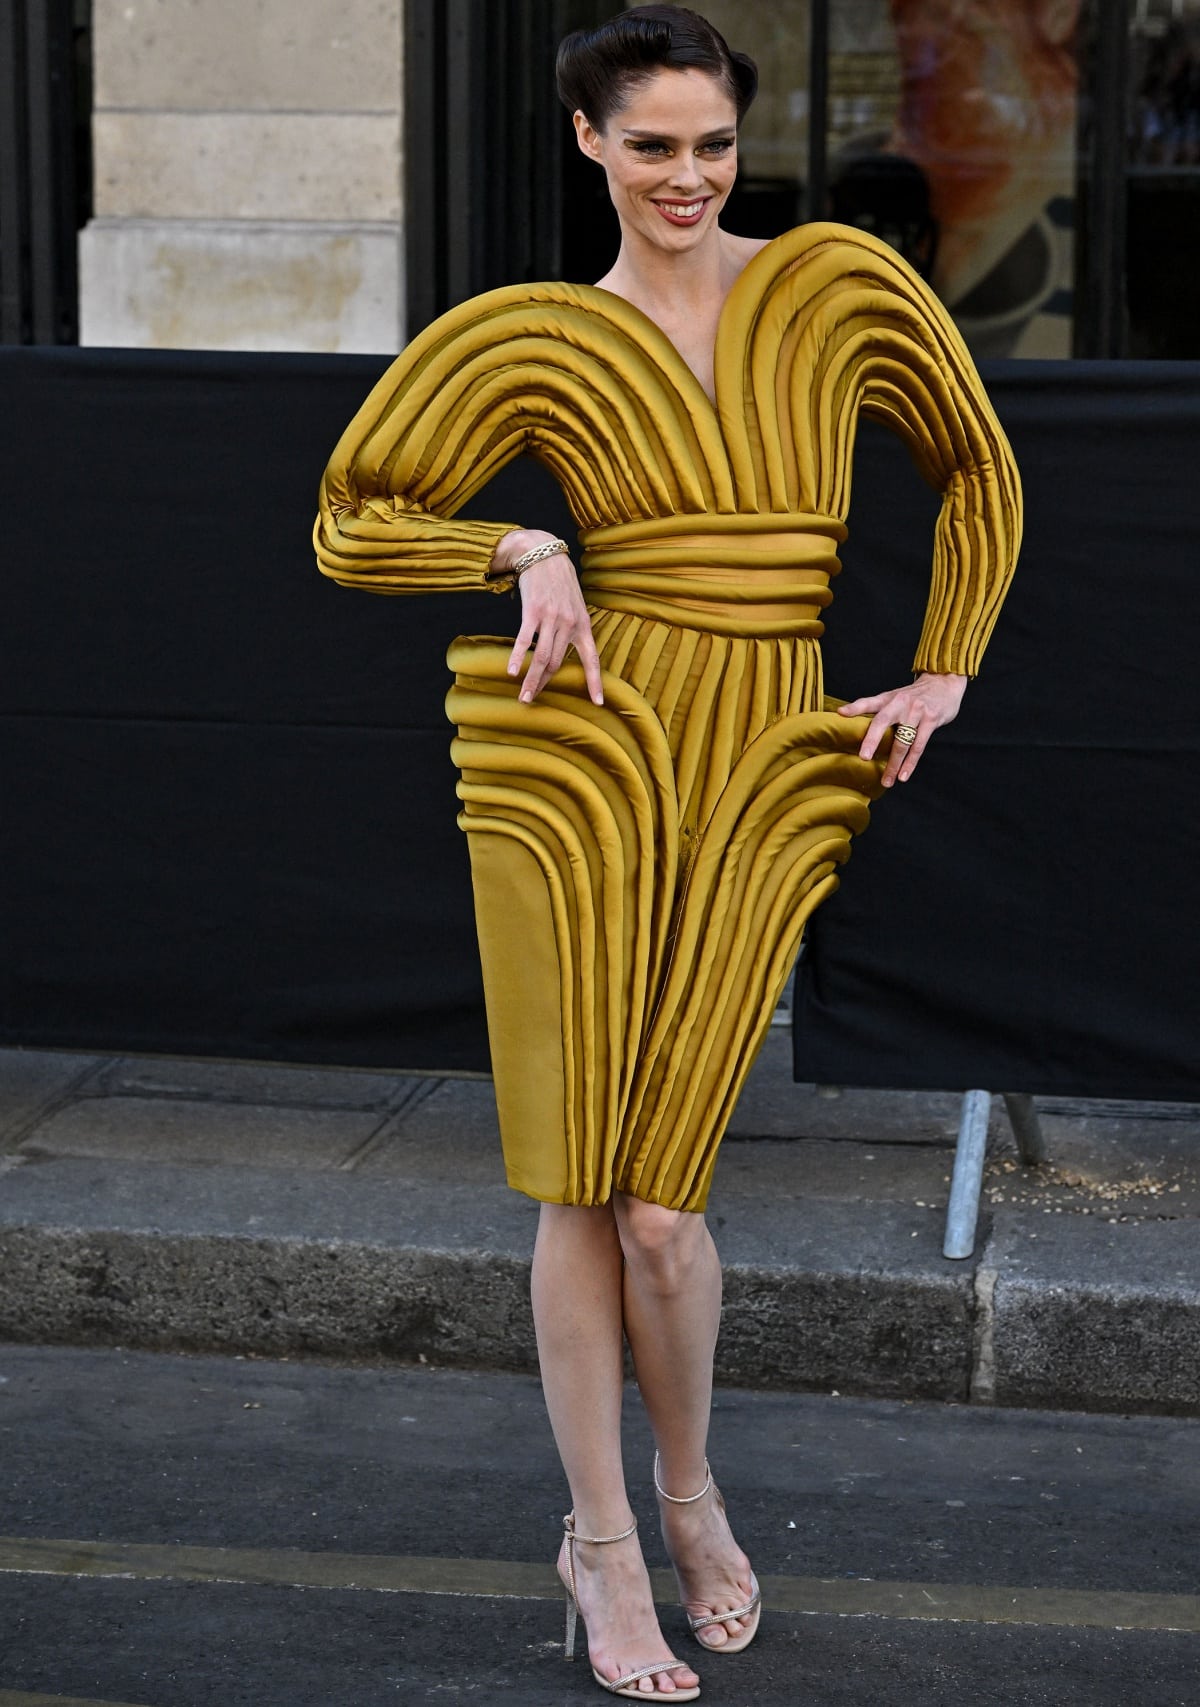 Coco Rocha in an archival Jean Paul Gaultier piece with a stylish updo and ankle-strap heels